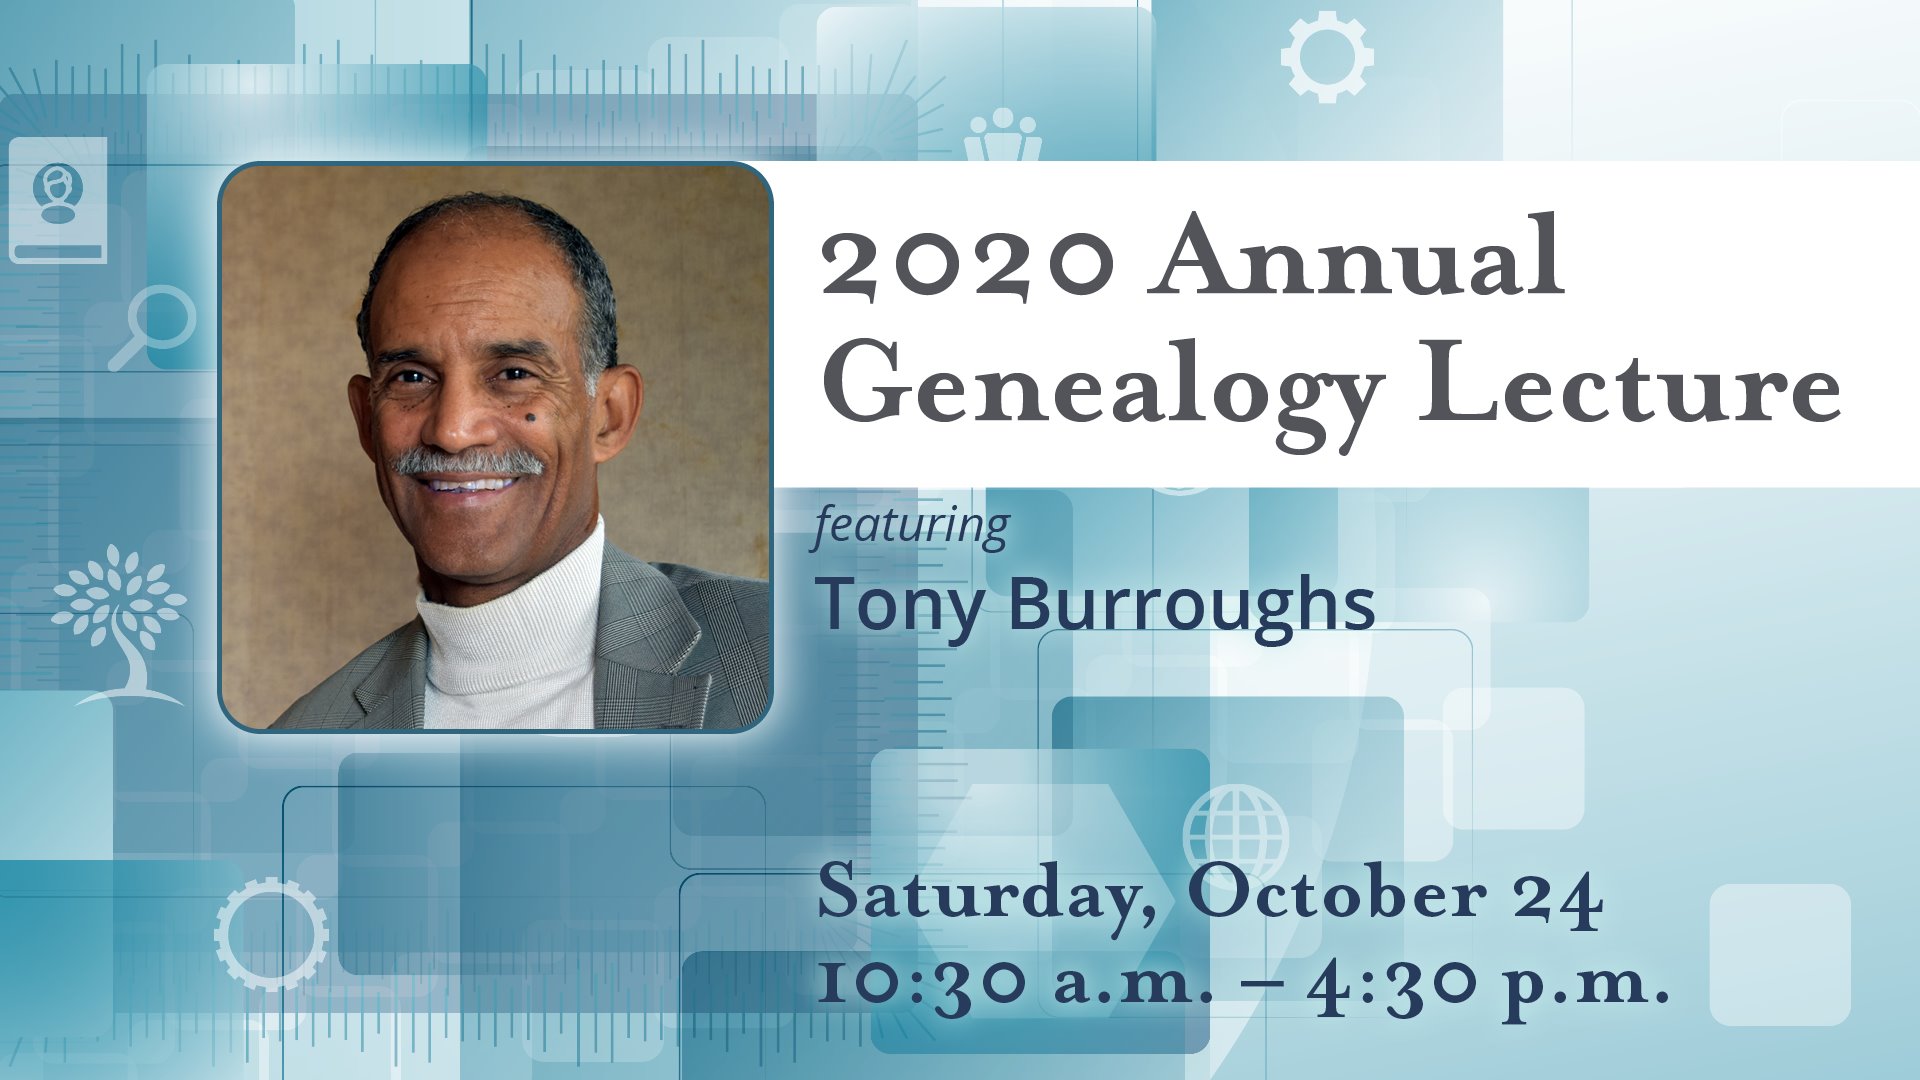 2020 Annual Genealogy Lecture featuring Tony Burroughs